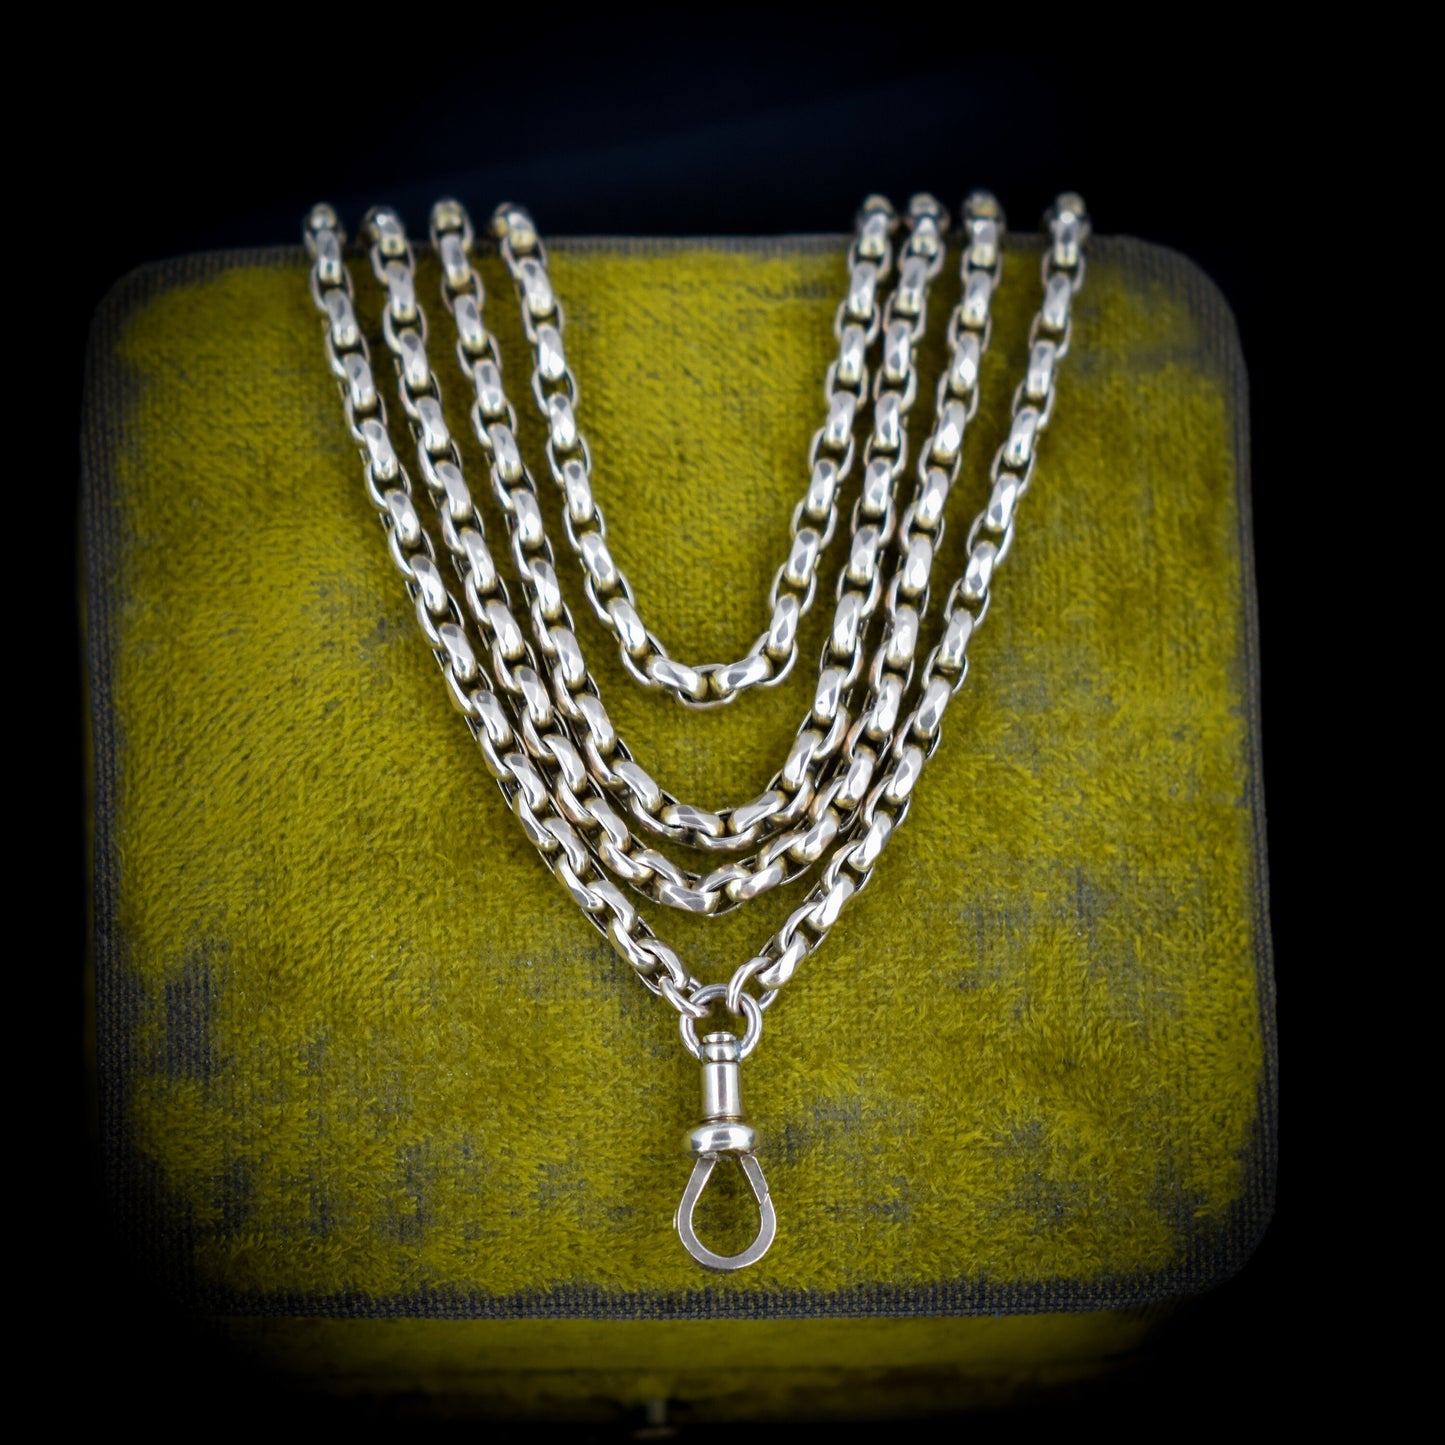 Antique Victorian 9ct 9K Gold Faceted Belcher Guard Muff Chain Necklace (49.6g) | 62" Length with Dog Clip